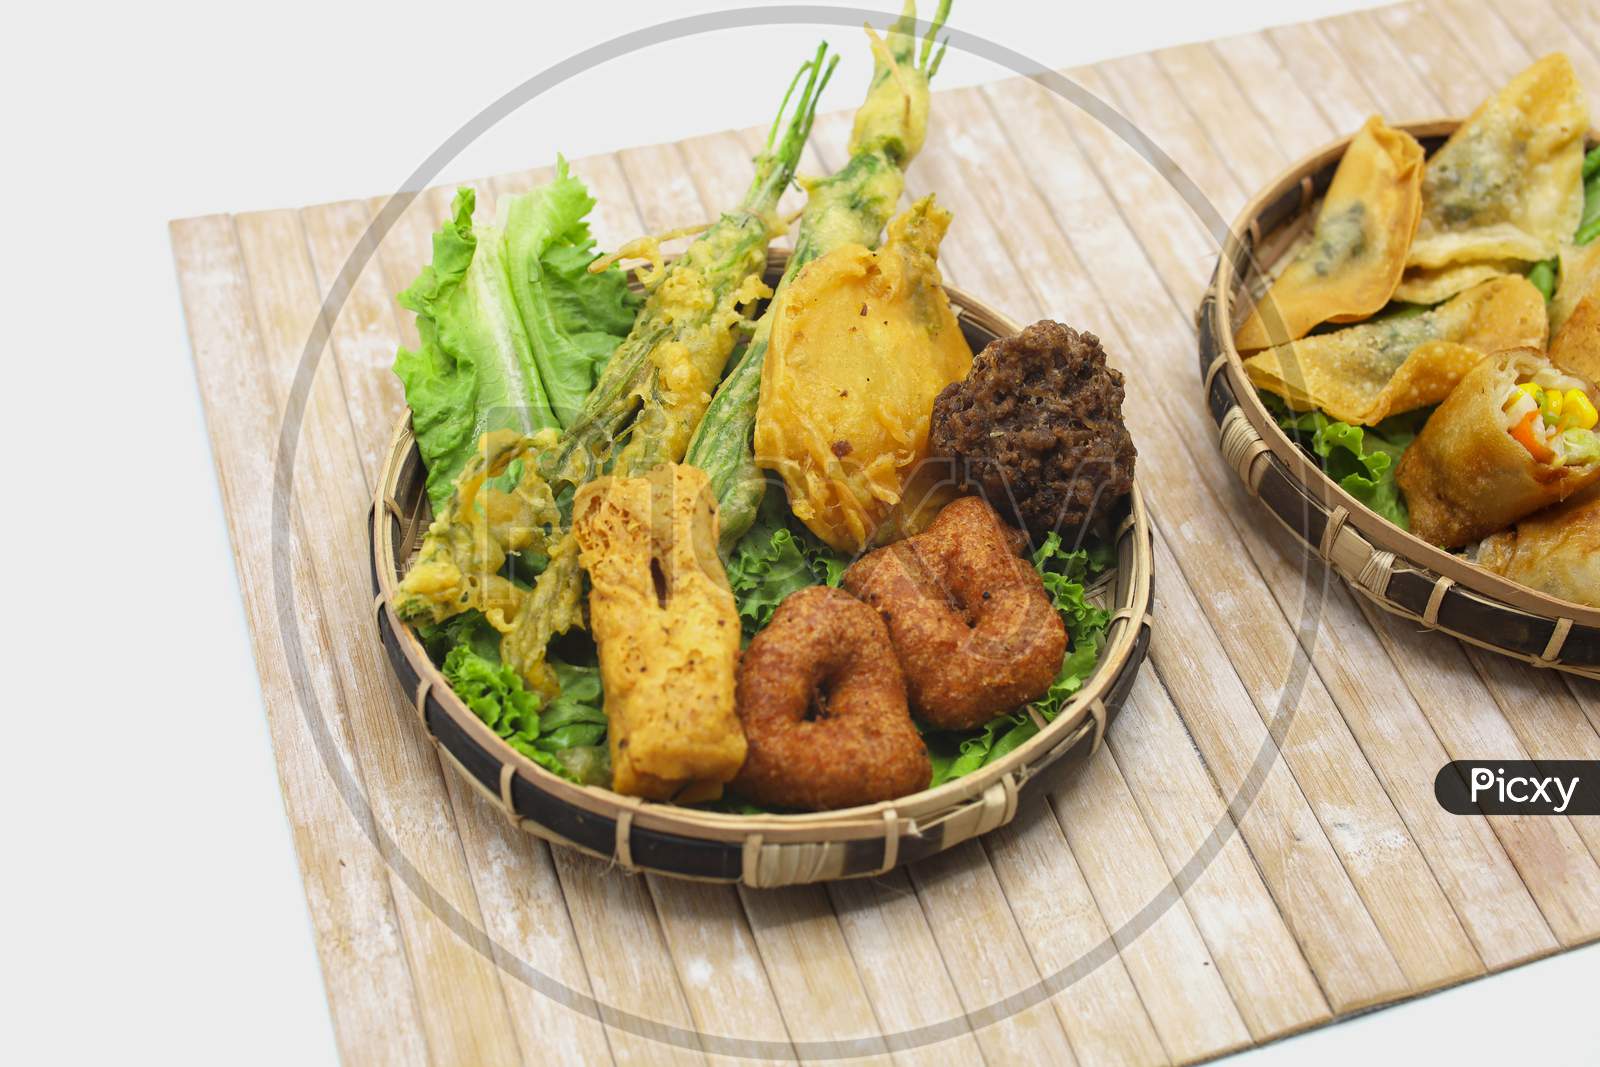 Burmese Dishes served in a Plates